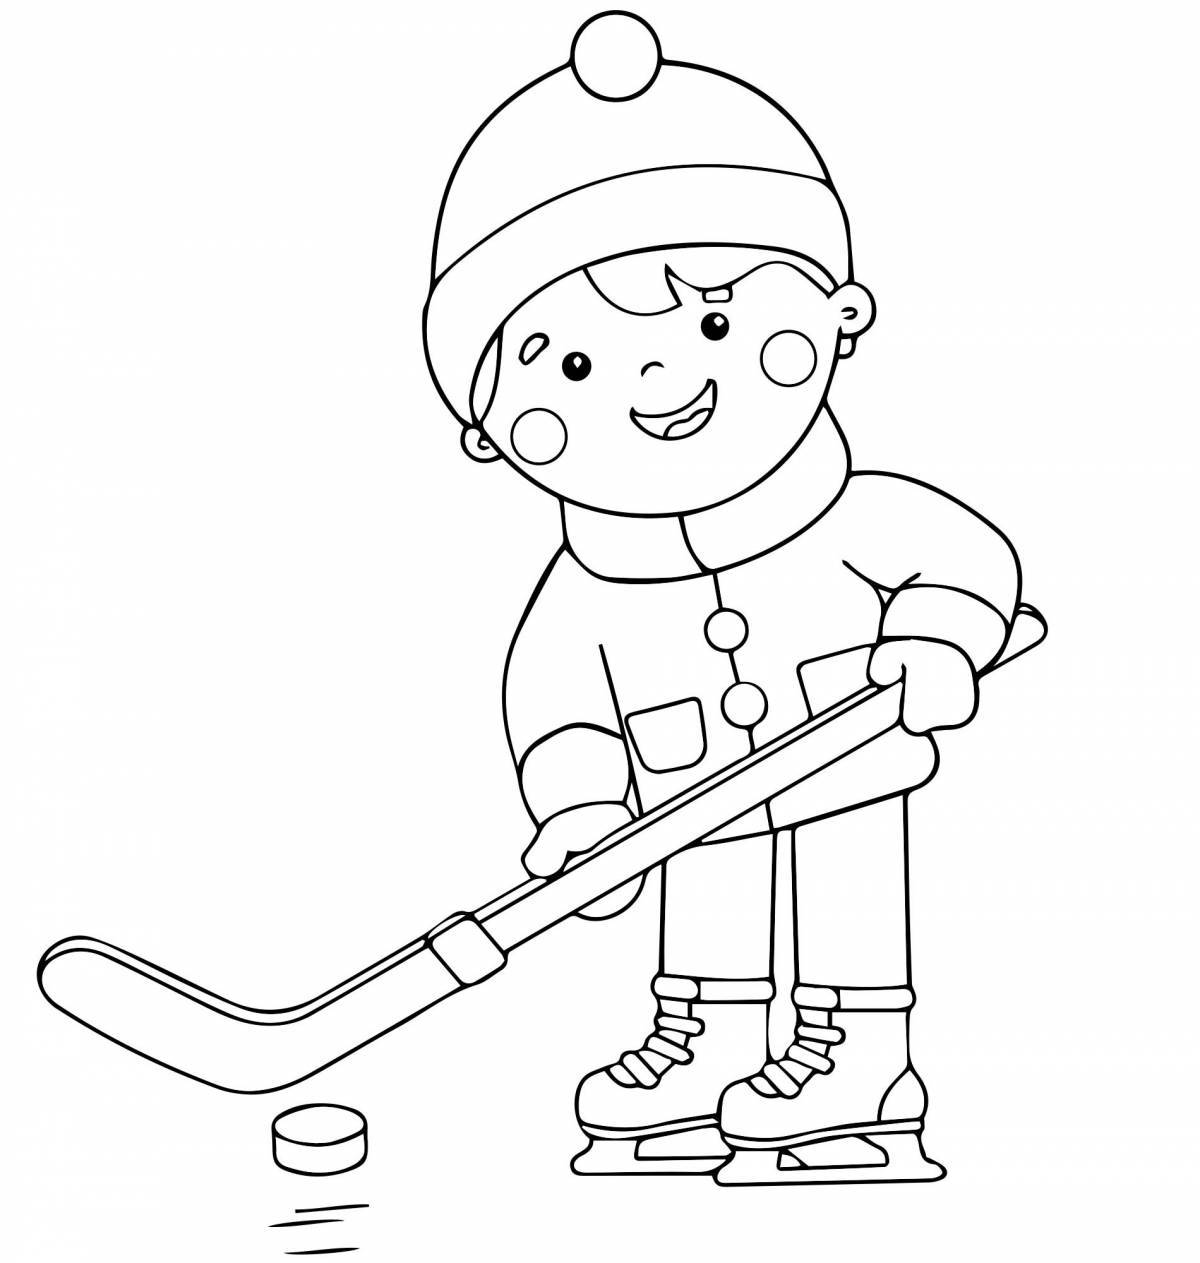 Charming coloring book for children 3-4 years old winter sports